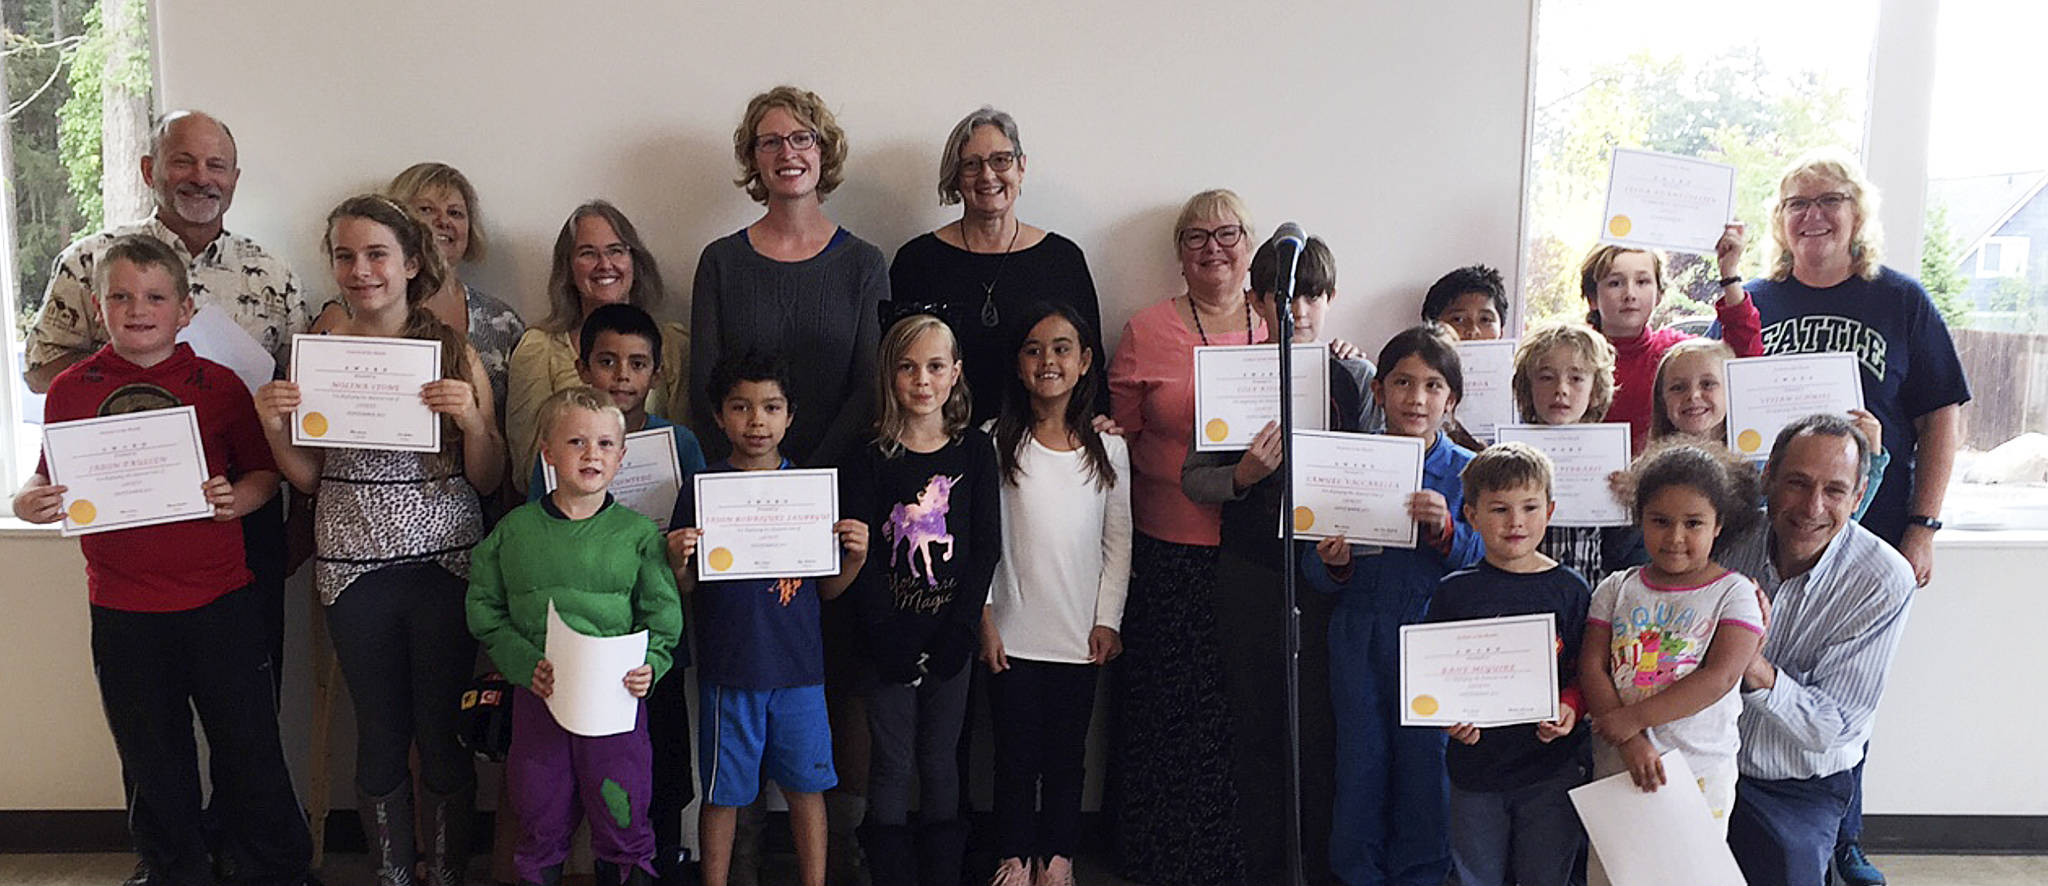 Contributed photo                                Students receiving awards for being safe in the month of September as part of a Positive Behavior Intervention and Support program at Orcas Elementary School.